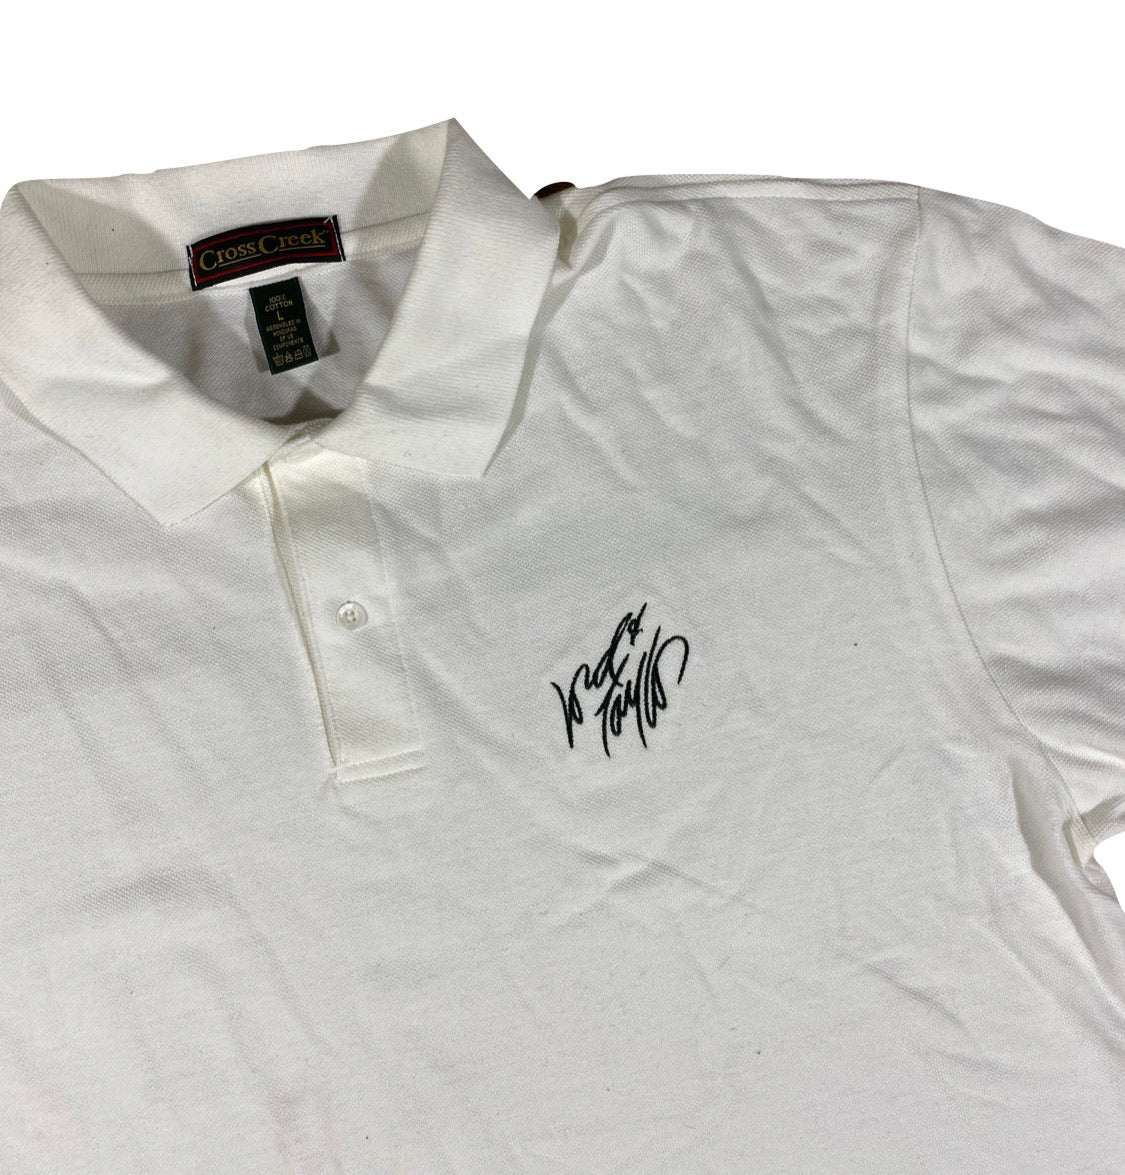 90s Lord and taylor polo. large